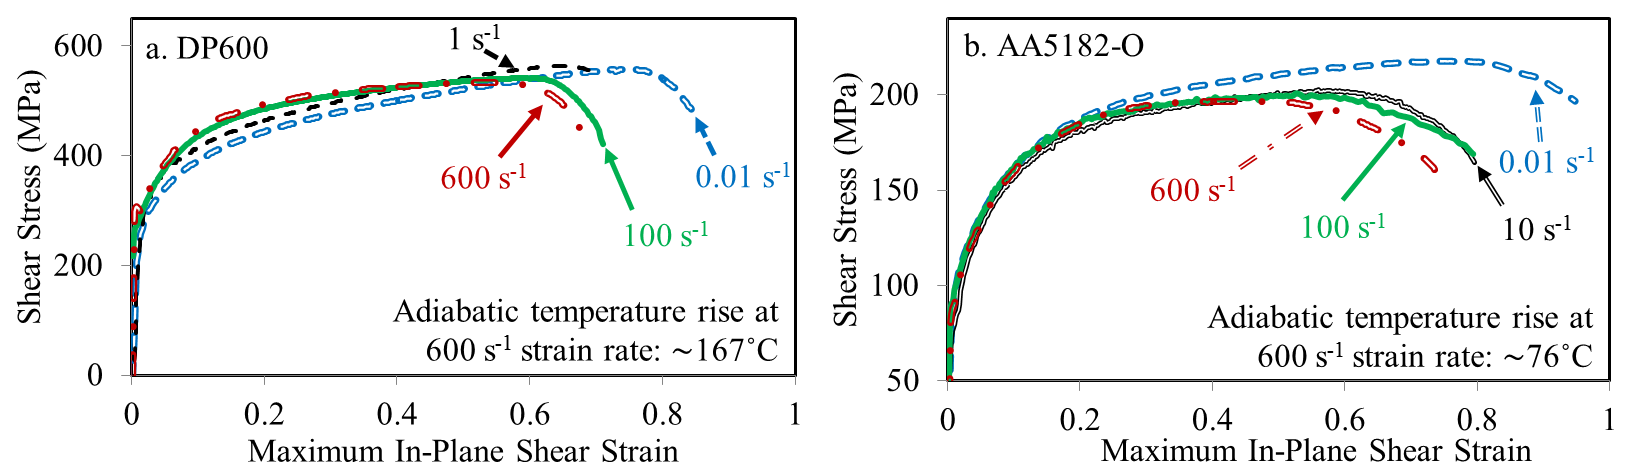 Strain rate effect on the stress-strain curves from shear experiments for (a) DP600 and (b) AA5182-O sheet specimens at strain rates ranging from 0.01 to 600 s-1.